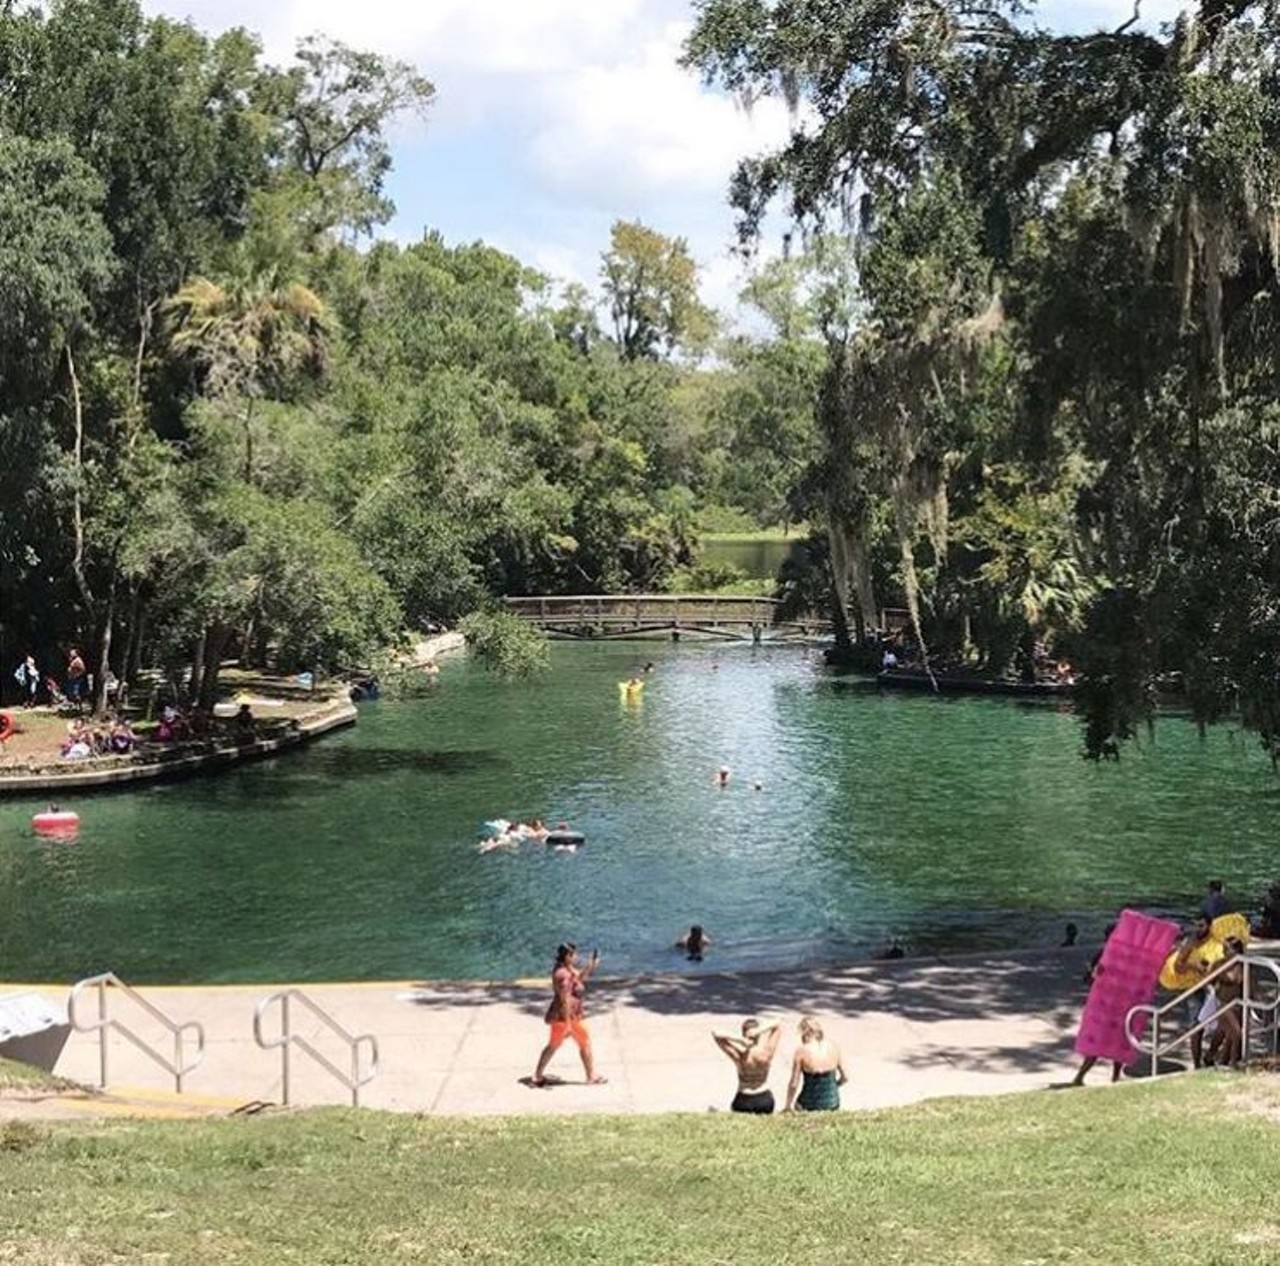 Wekiwa Springs State Park
Estimated driving distance: 30 minutes
Get there early because this popular clear water spring with origins in the Wekiva River fills up fast with tourists and residents. Canoe and kayak rentals are available.
1800 Wekiwa Circle, Apopka
Photo via meenbean_/Instagram